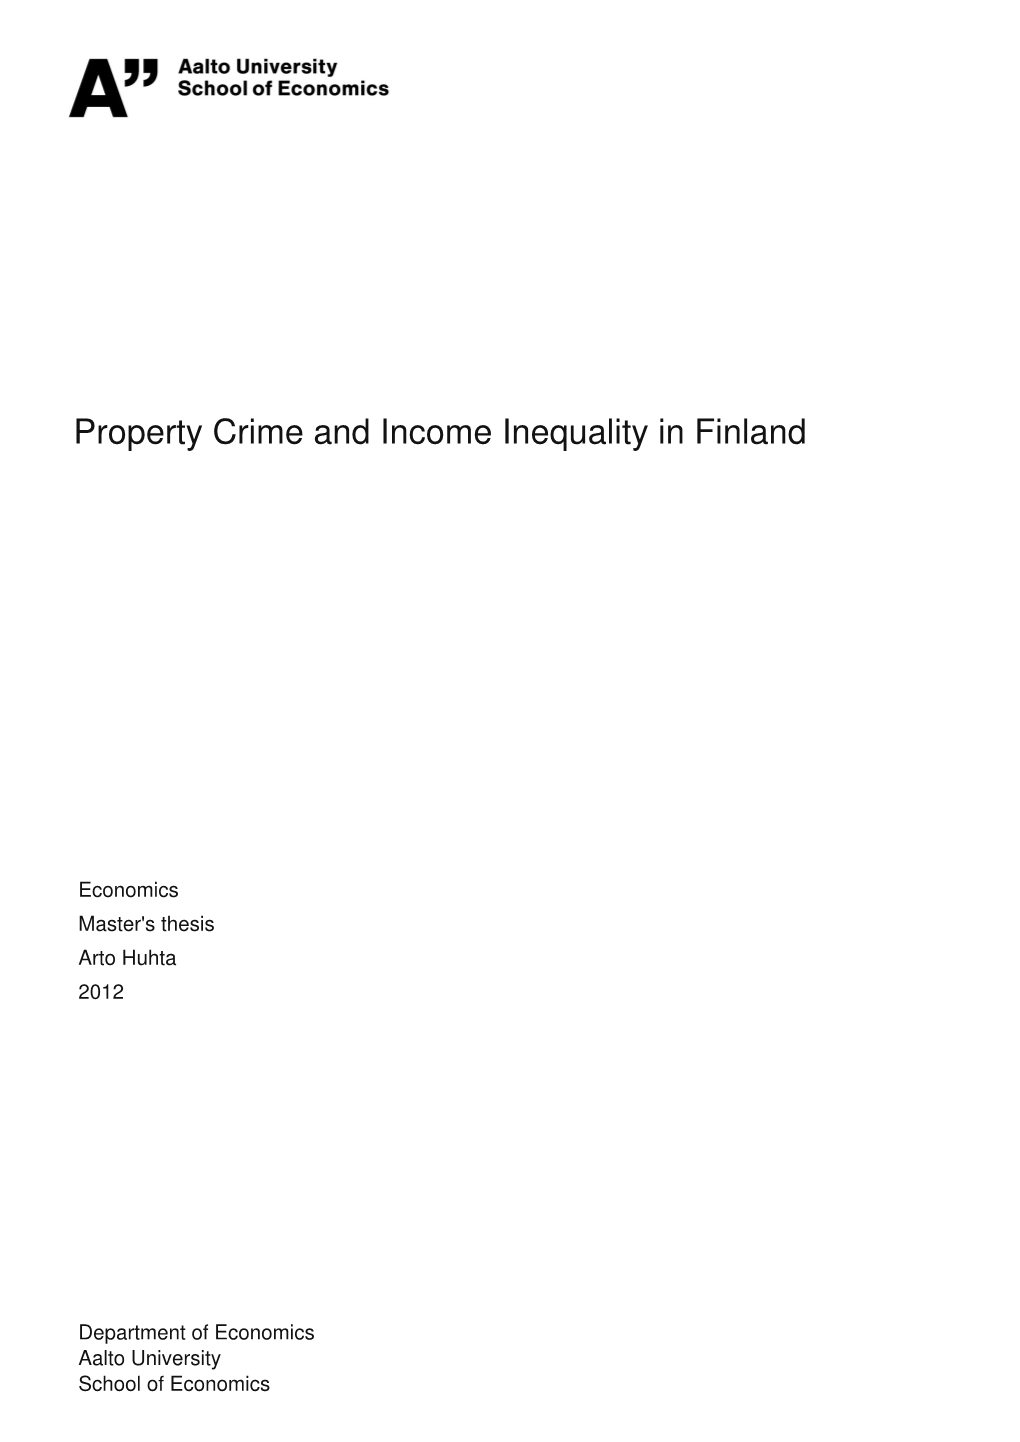 Property Crime and Income Inequality in Finland